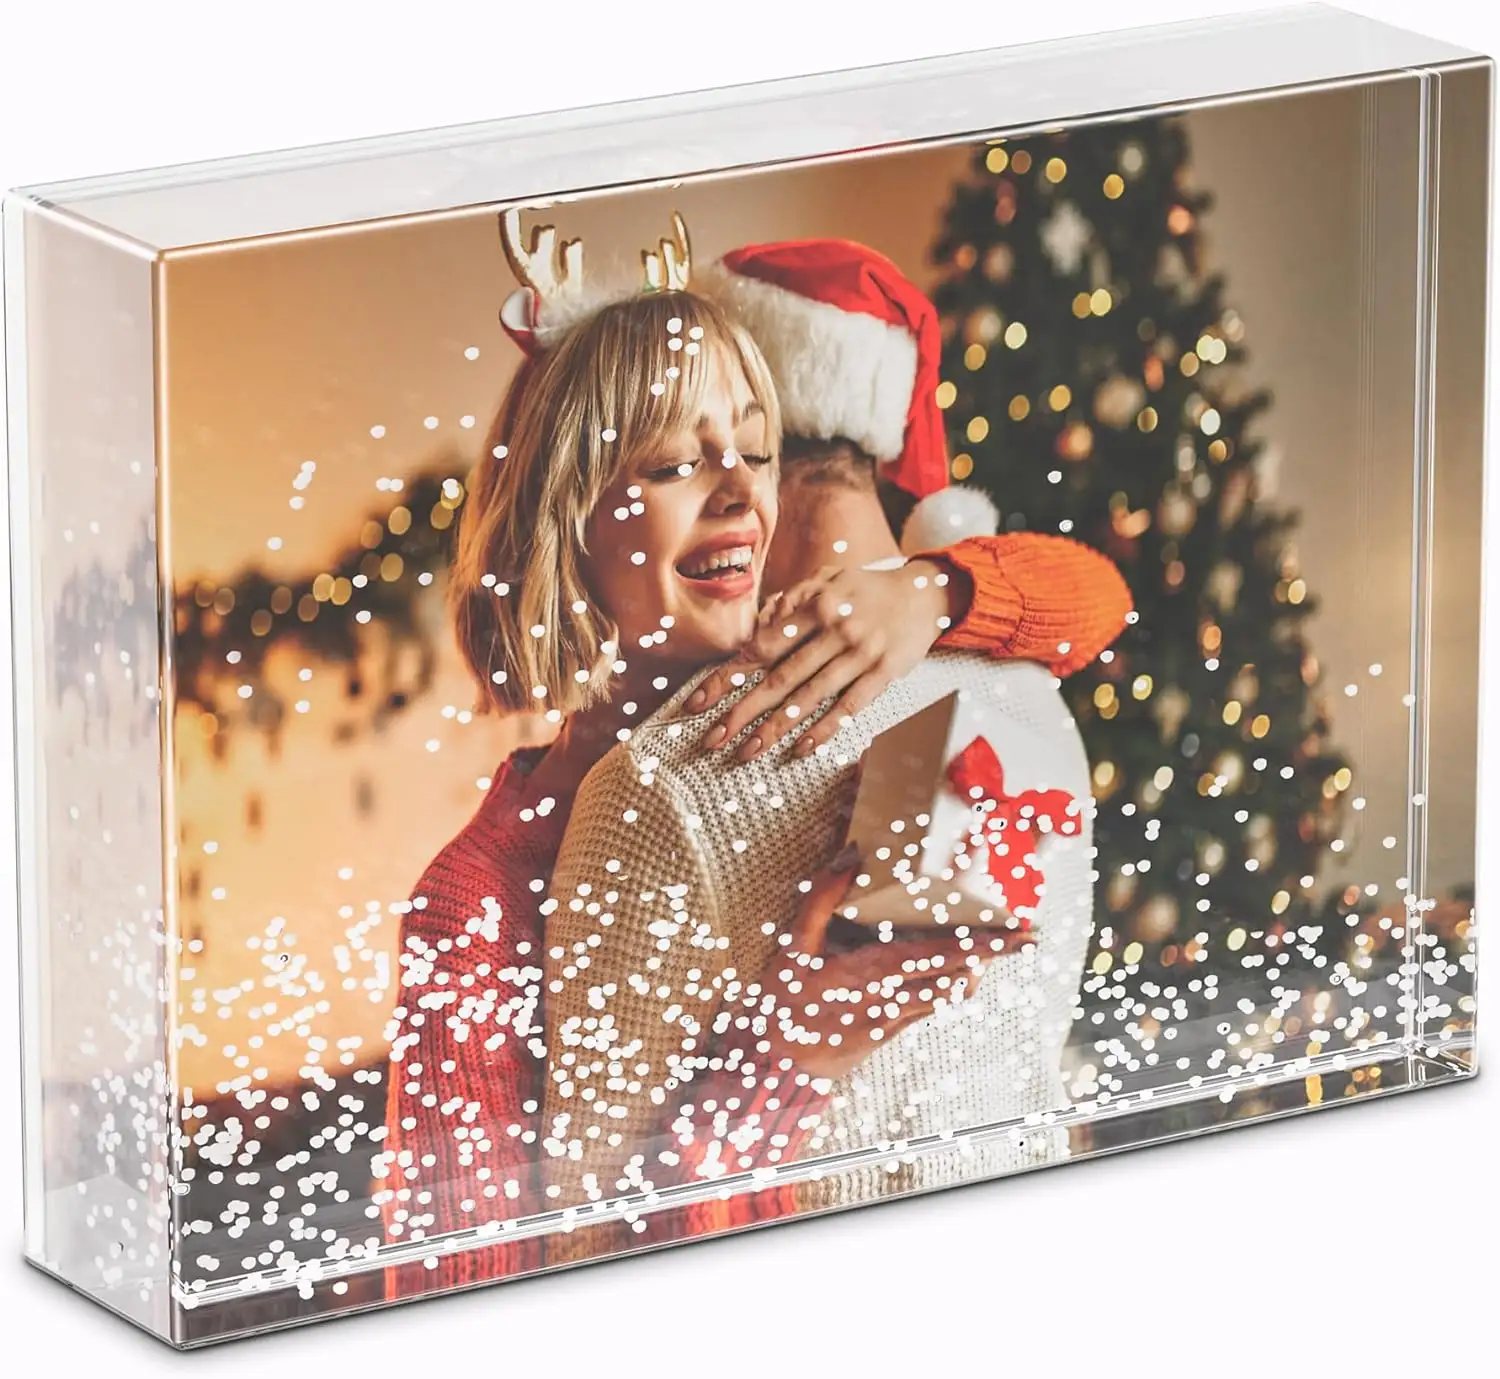 Glitter Liquid Photo Frame for Christmas  Clear Plastic Acrylic Floating Sparkle Water Personalized Snow Globe Photo Frame